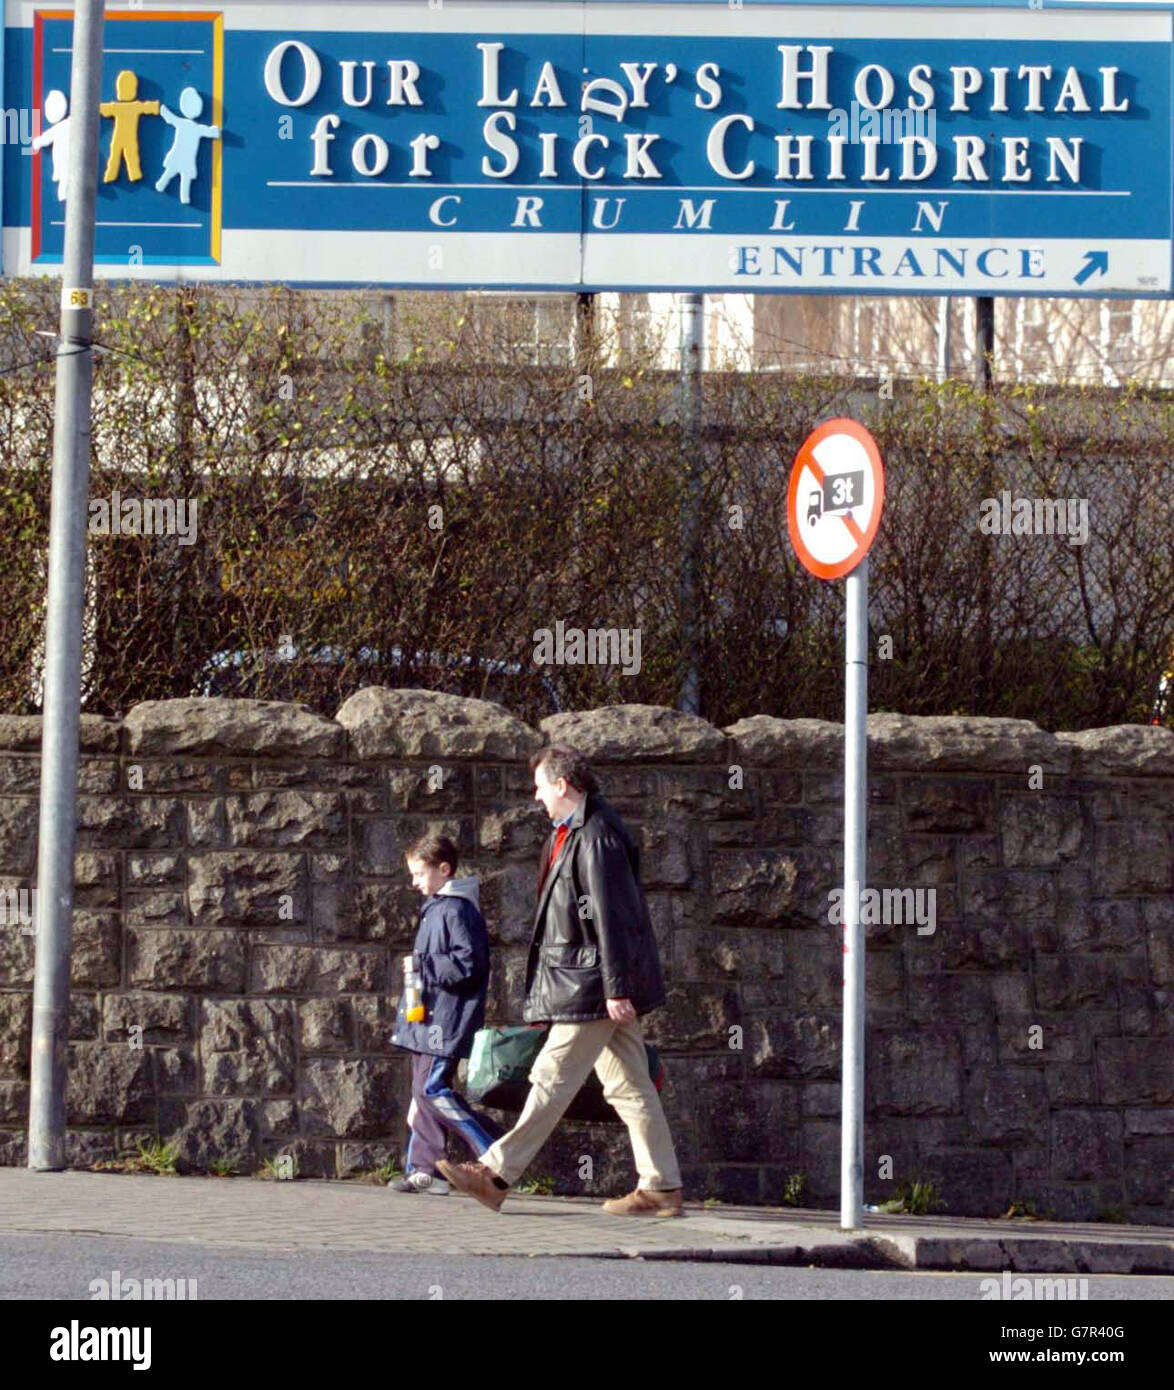 Our Lady's Hospital for Sick Children in Crumlin, Dublin, after a report into the death of a two-year-old girl, Roisin Ruddle, whose heart surgery was postponed, has severely criticised the country's leading children's hospital for inaction in recruiting intensive care nurses. Health minister Mary Harney today told the Dail that deficiencies in the system must be rectified to prevent any reoccurrence. Stock Photo